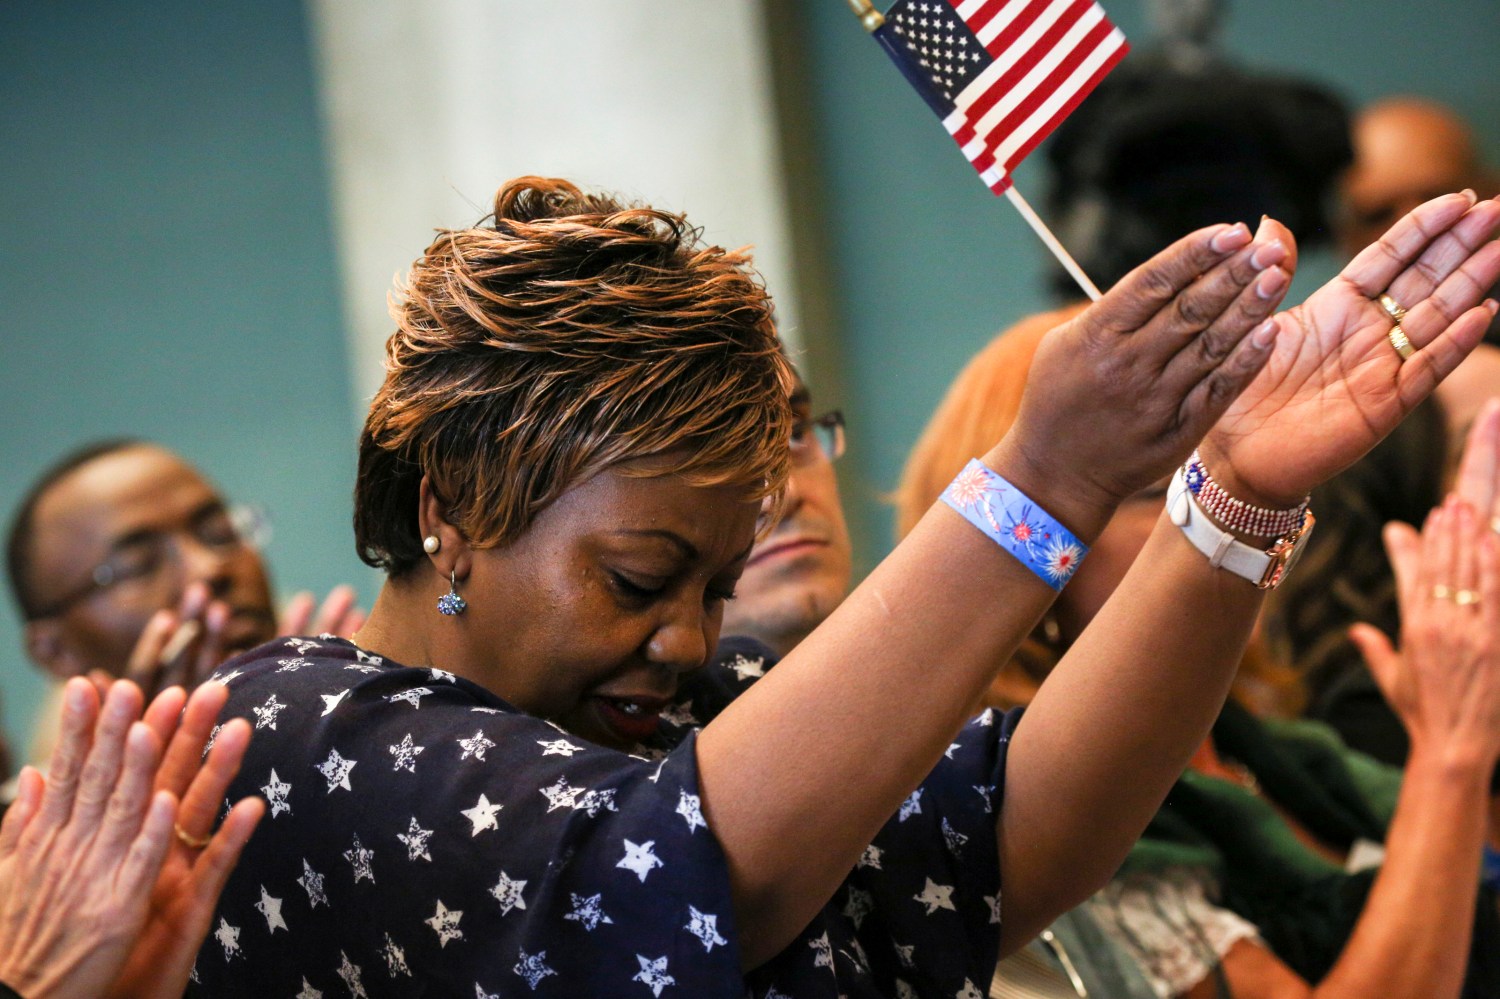 A new U.S. citizen reacts to calls for diversity inclusion by a speaker during an Independence Day naturalization ceremony held by U.S. Citizenship and Immigration Services for 503 people at Seattle Center in Seattle, Washington July 4, 2016. REUTERS/David Ryder